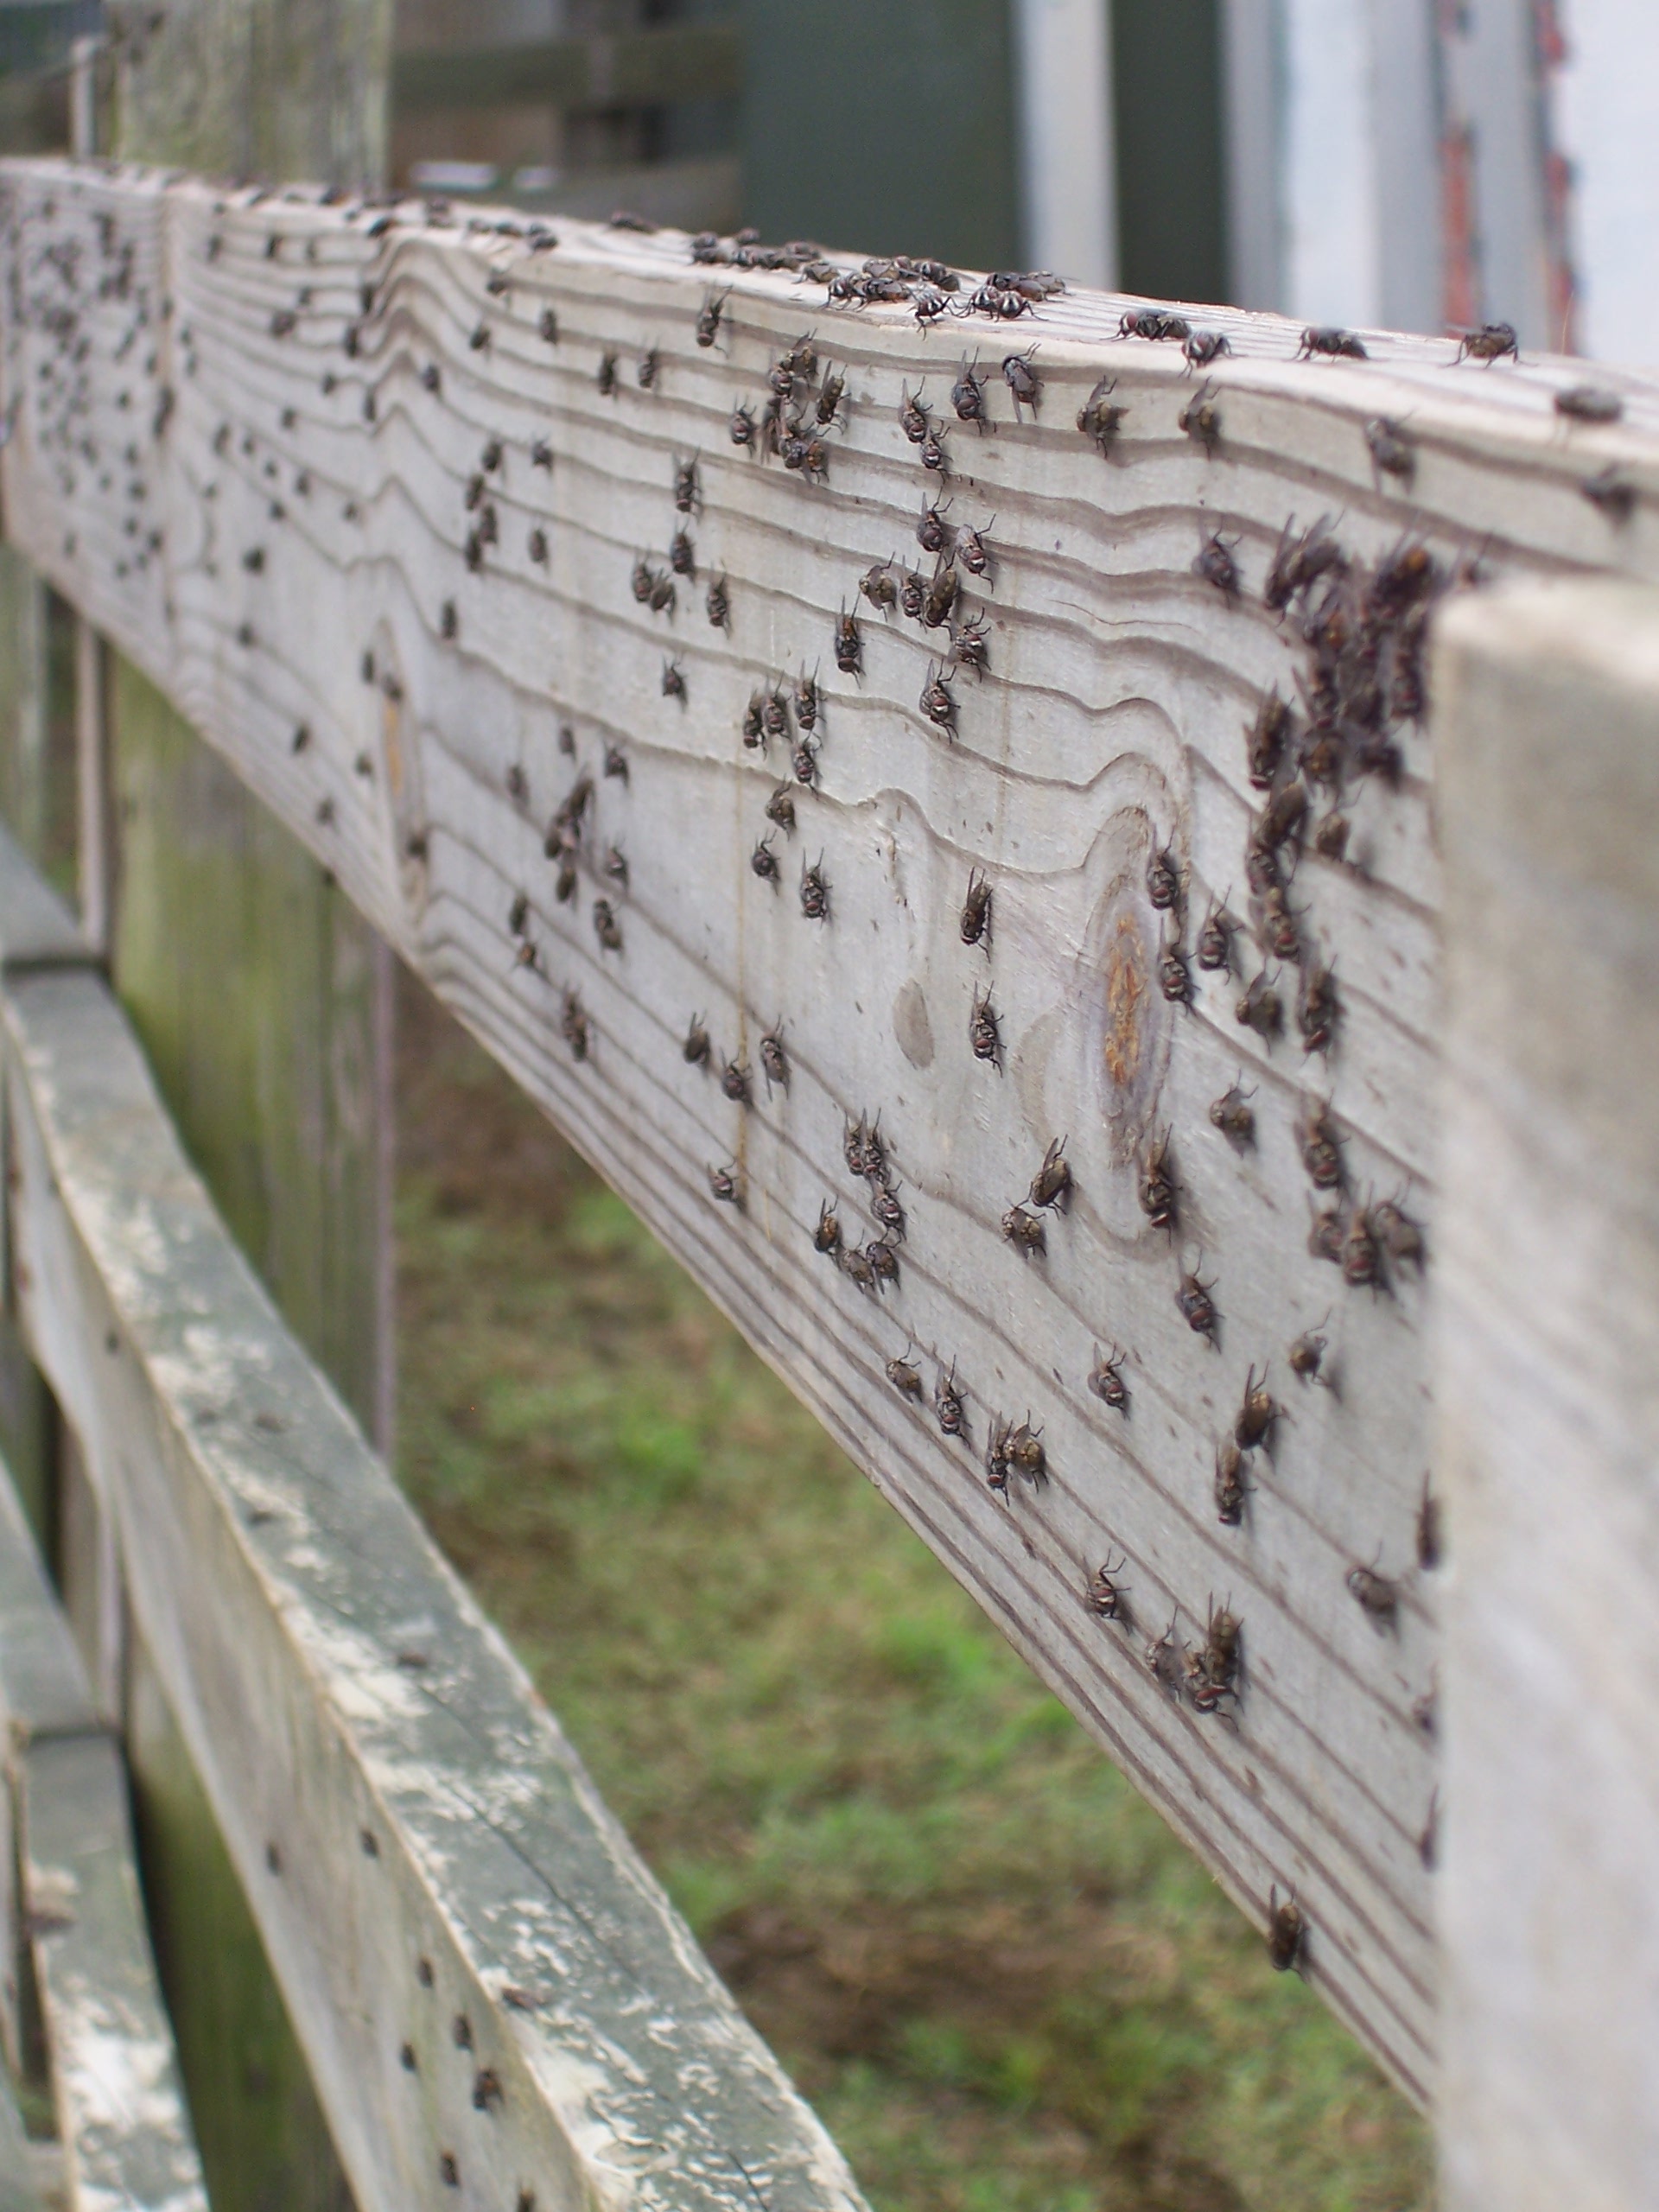 Face Fly Pest Management | NC State Extension